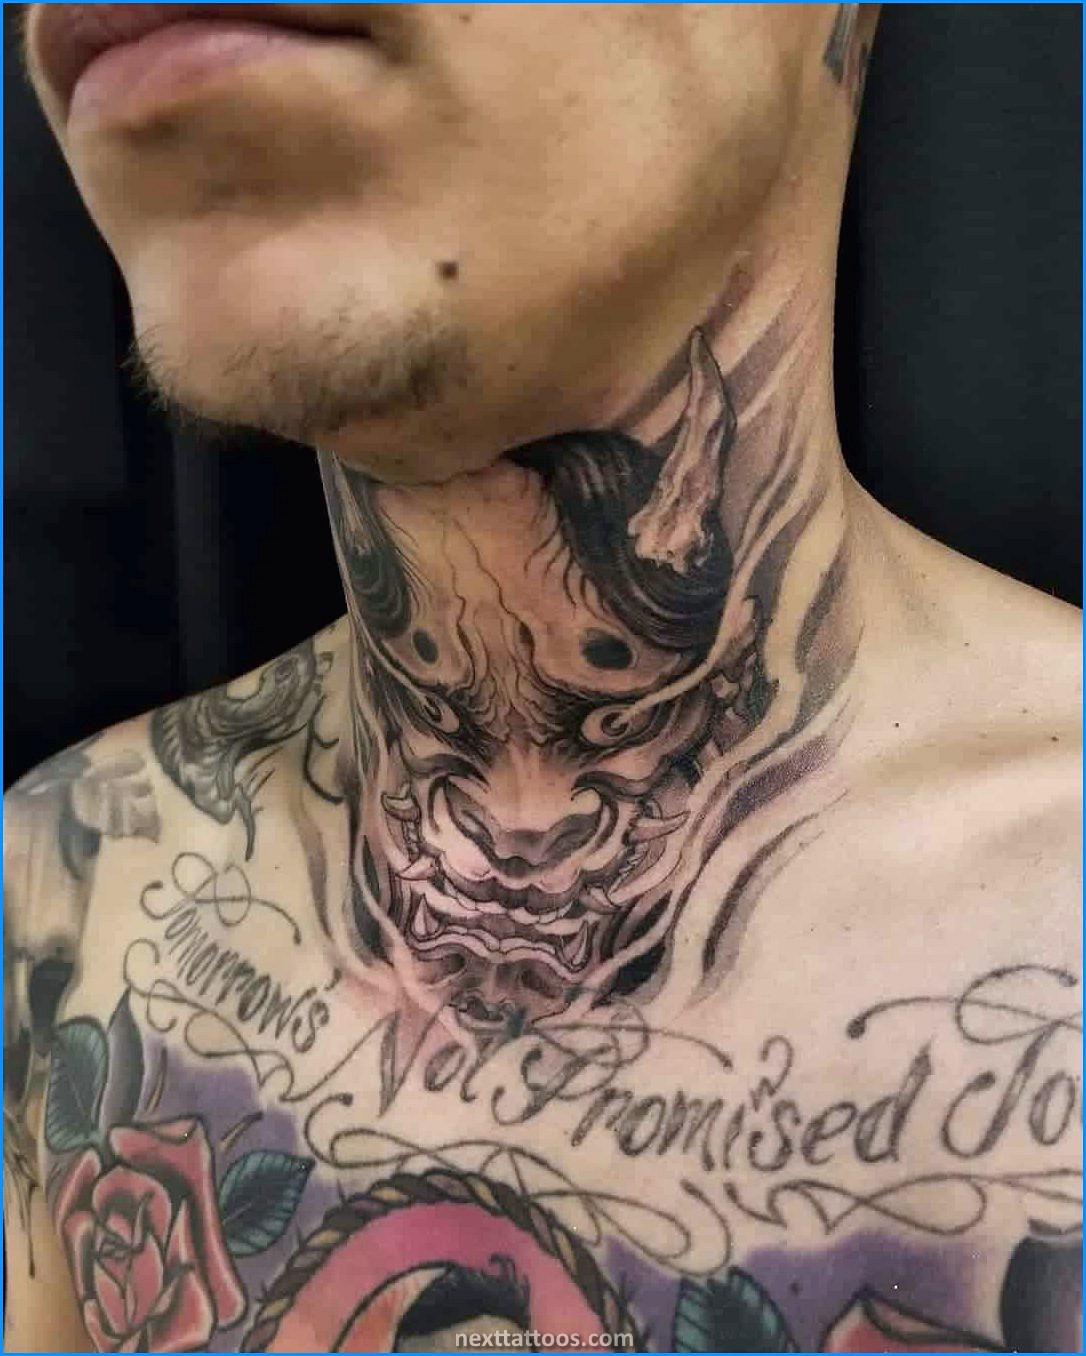 Neck Tattoos For Men - Getting a Tattoo on Your Neck